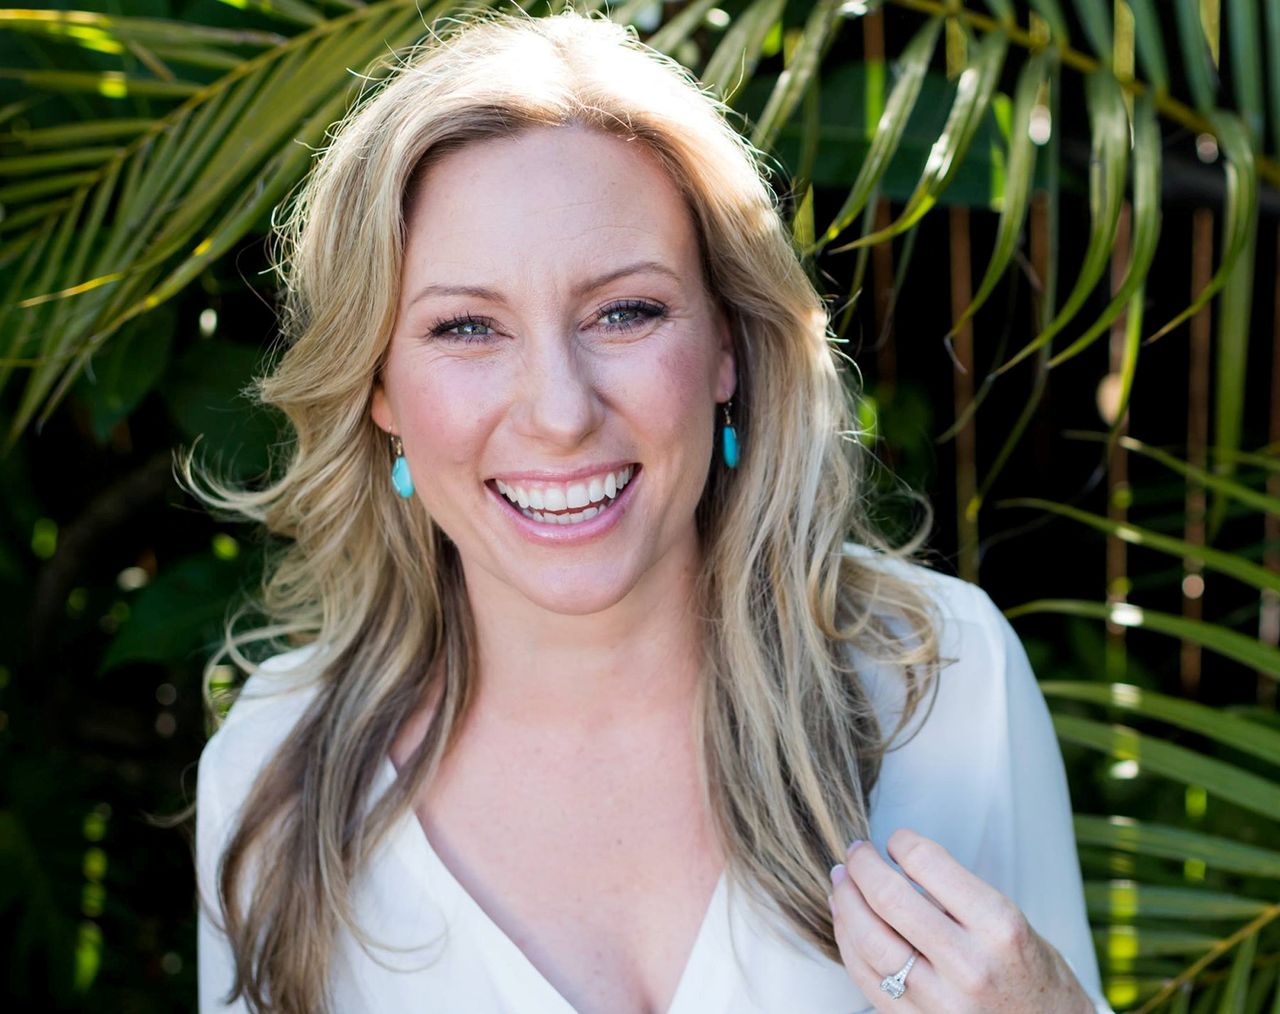 Justine Damond, also known as Justine Ruszczyk, from Sydney, is seen in this 2015 photo released by Stephen Govel Photography in New York, U.S., on July 17, 2017. 